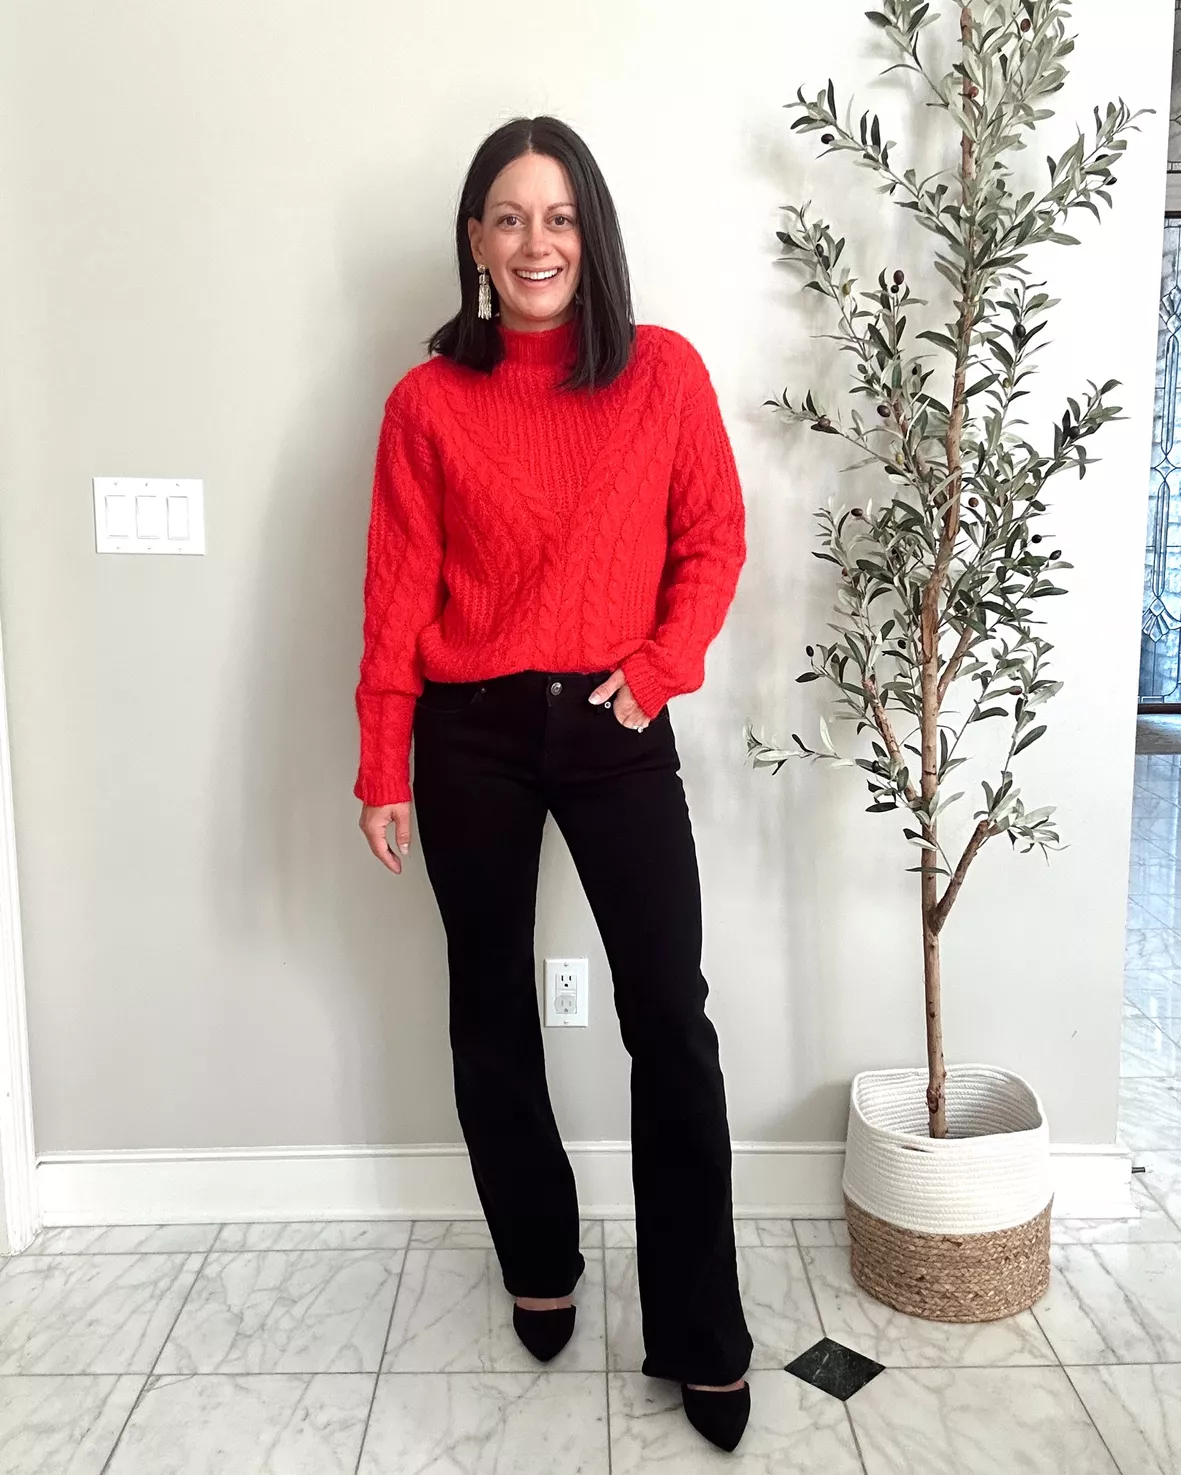 Red Flare Pants with Turtleneck Outfits (2 ideas & outfits